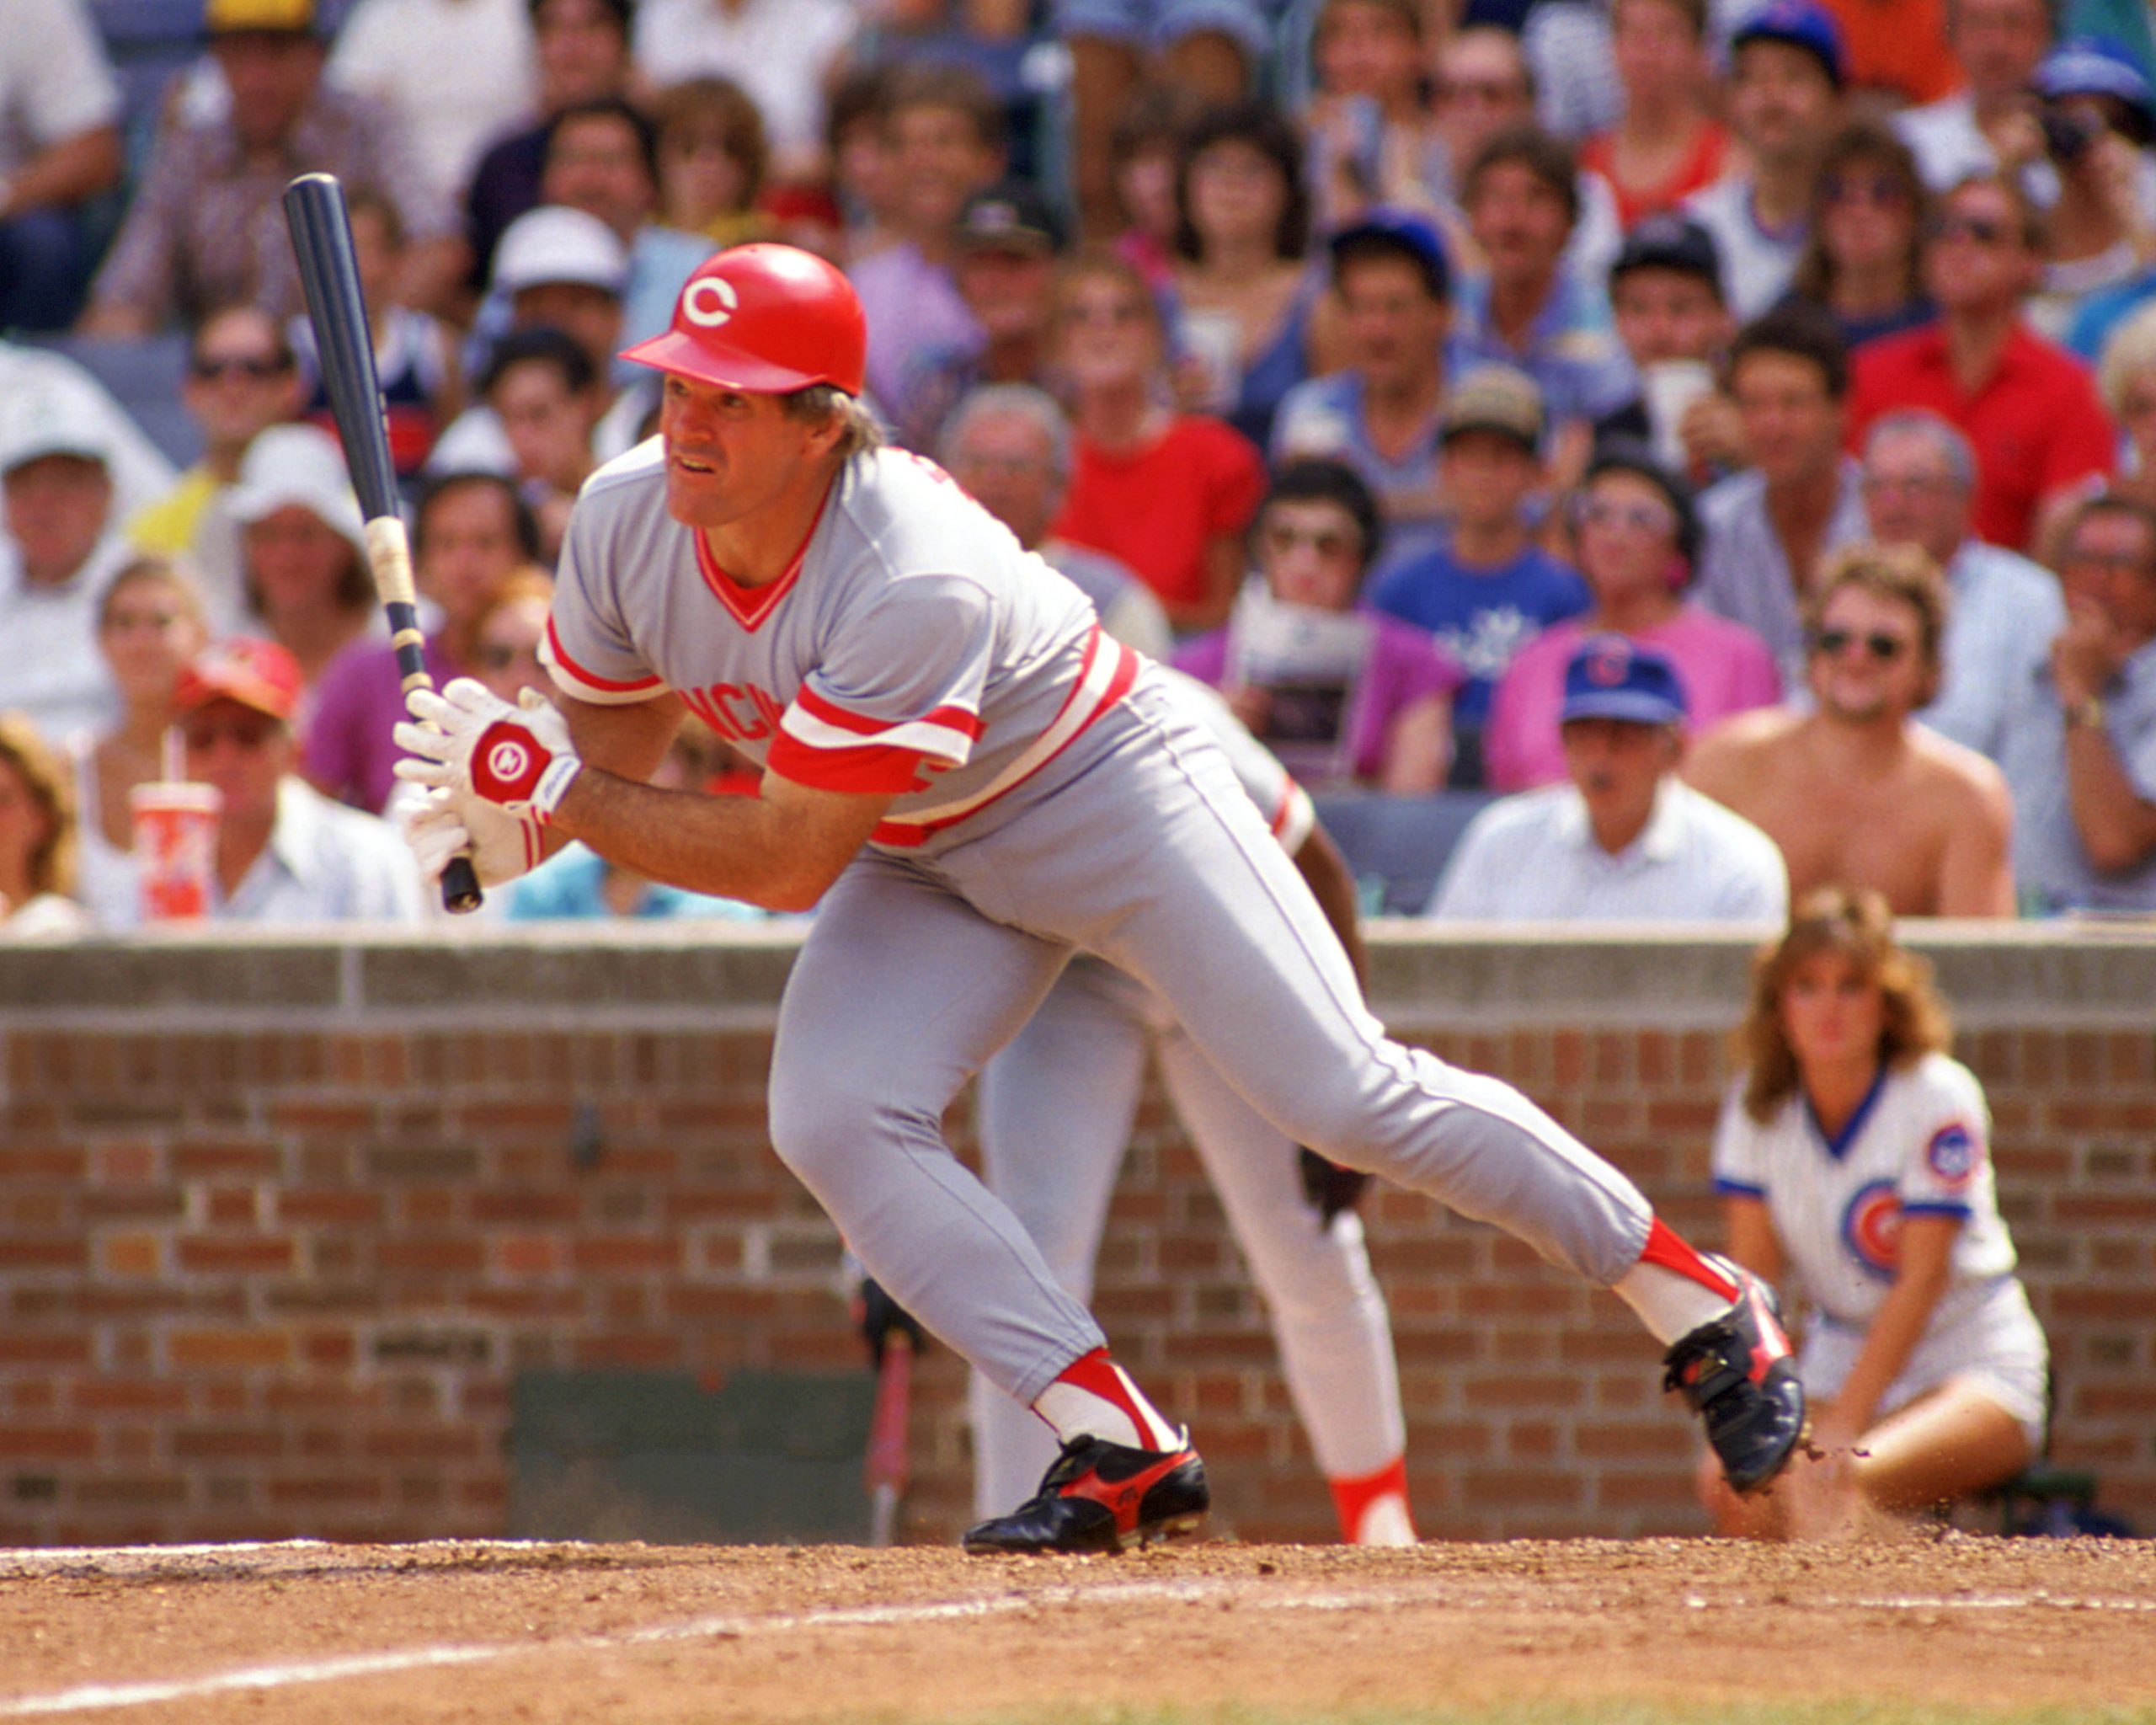 Pete Rose of the Cincinnati Reds bats during an MLB game against the Chicago Cubs.